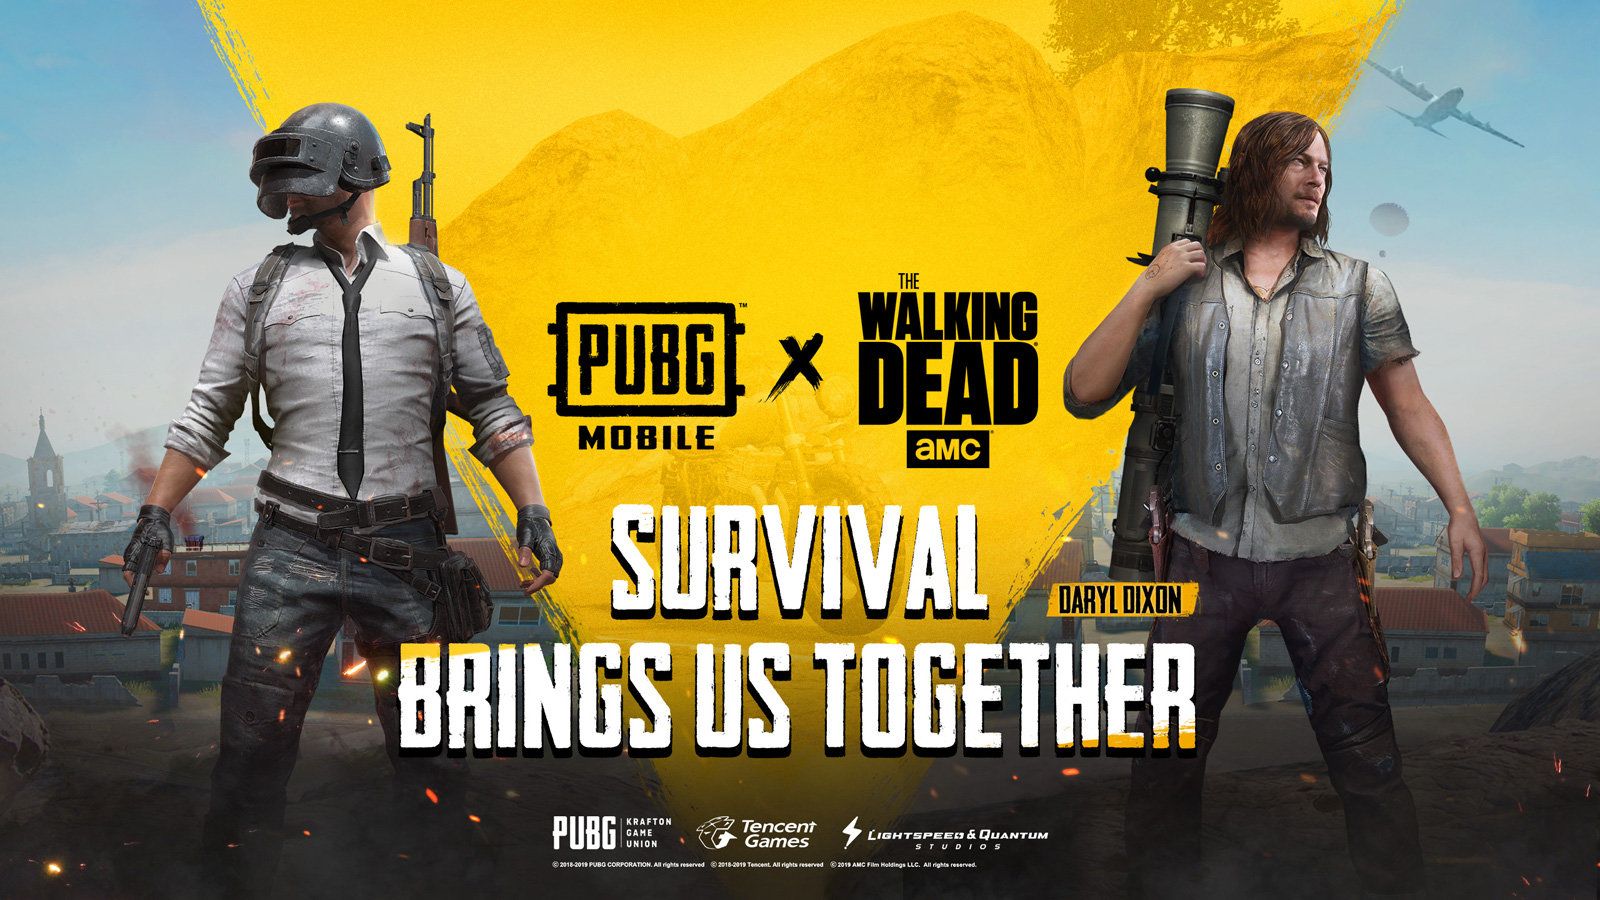 PUBG Mobile' will add characters and gear from 'The Walking Dead